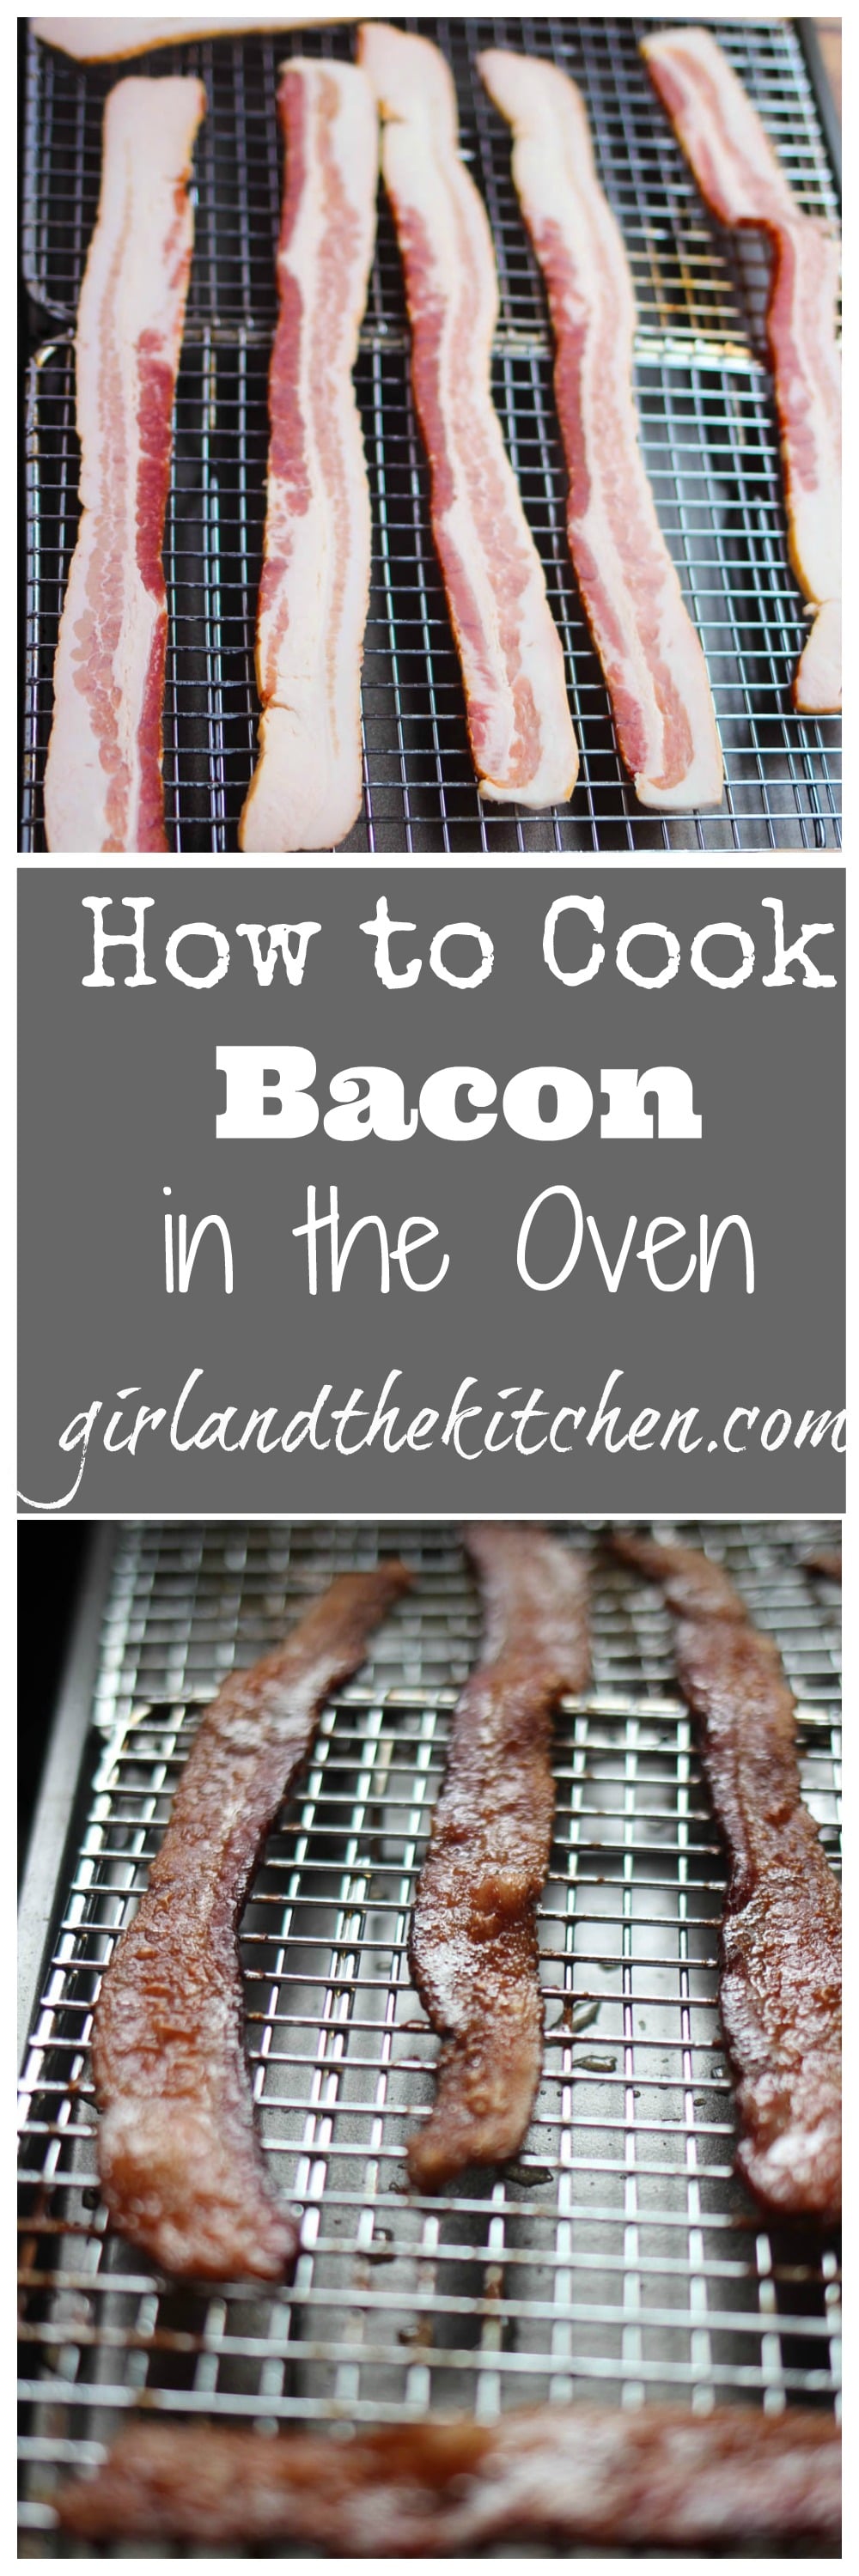 Get ready for the best and the cleanest method to cook bacon! Check out how to cook bacon in the oven and create the crispiest and tastiest bacon ever!